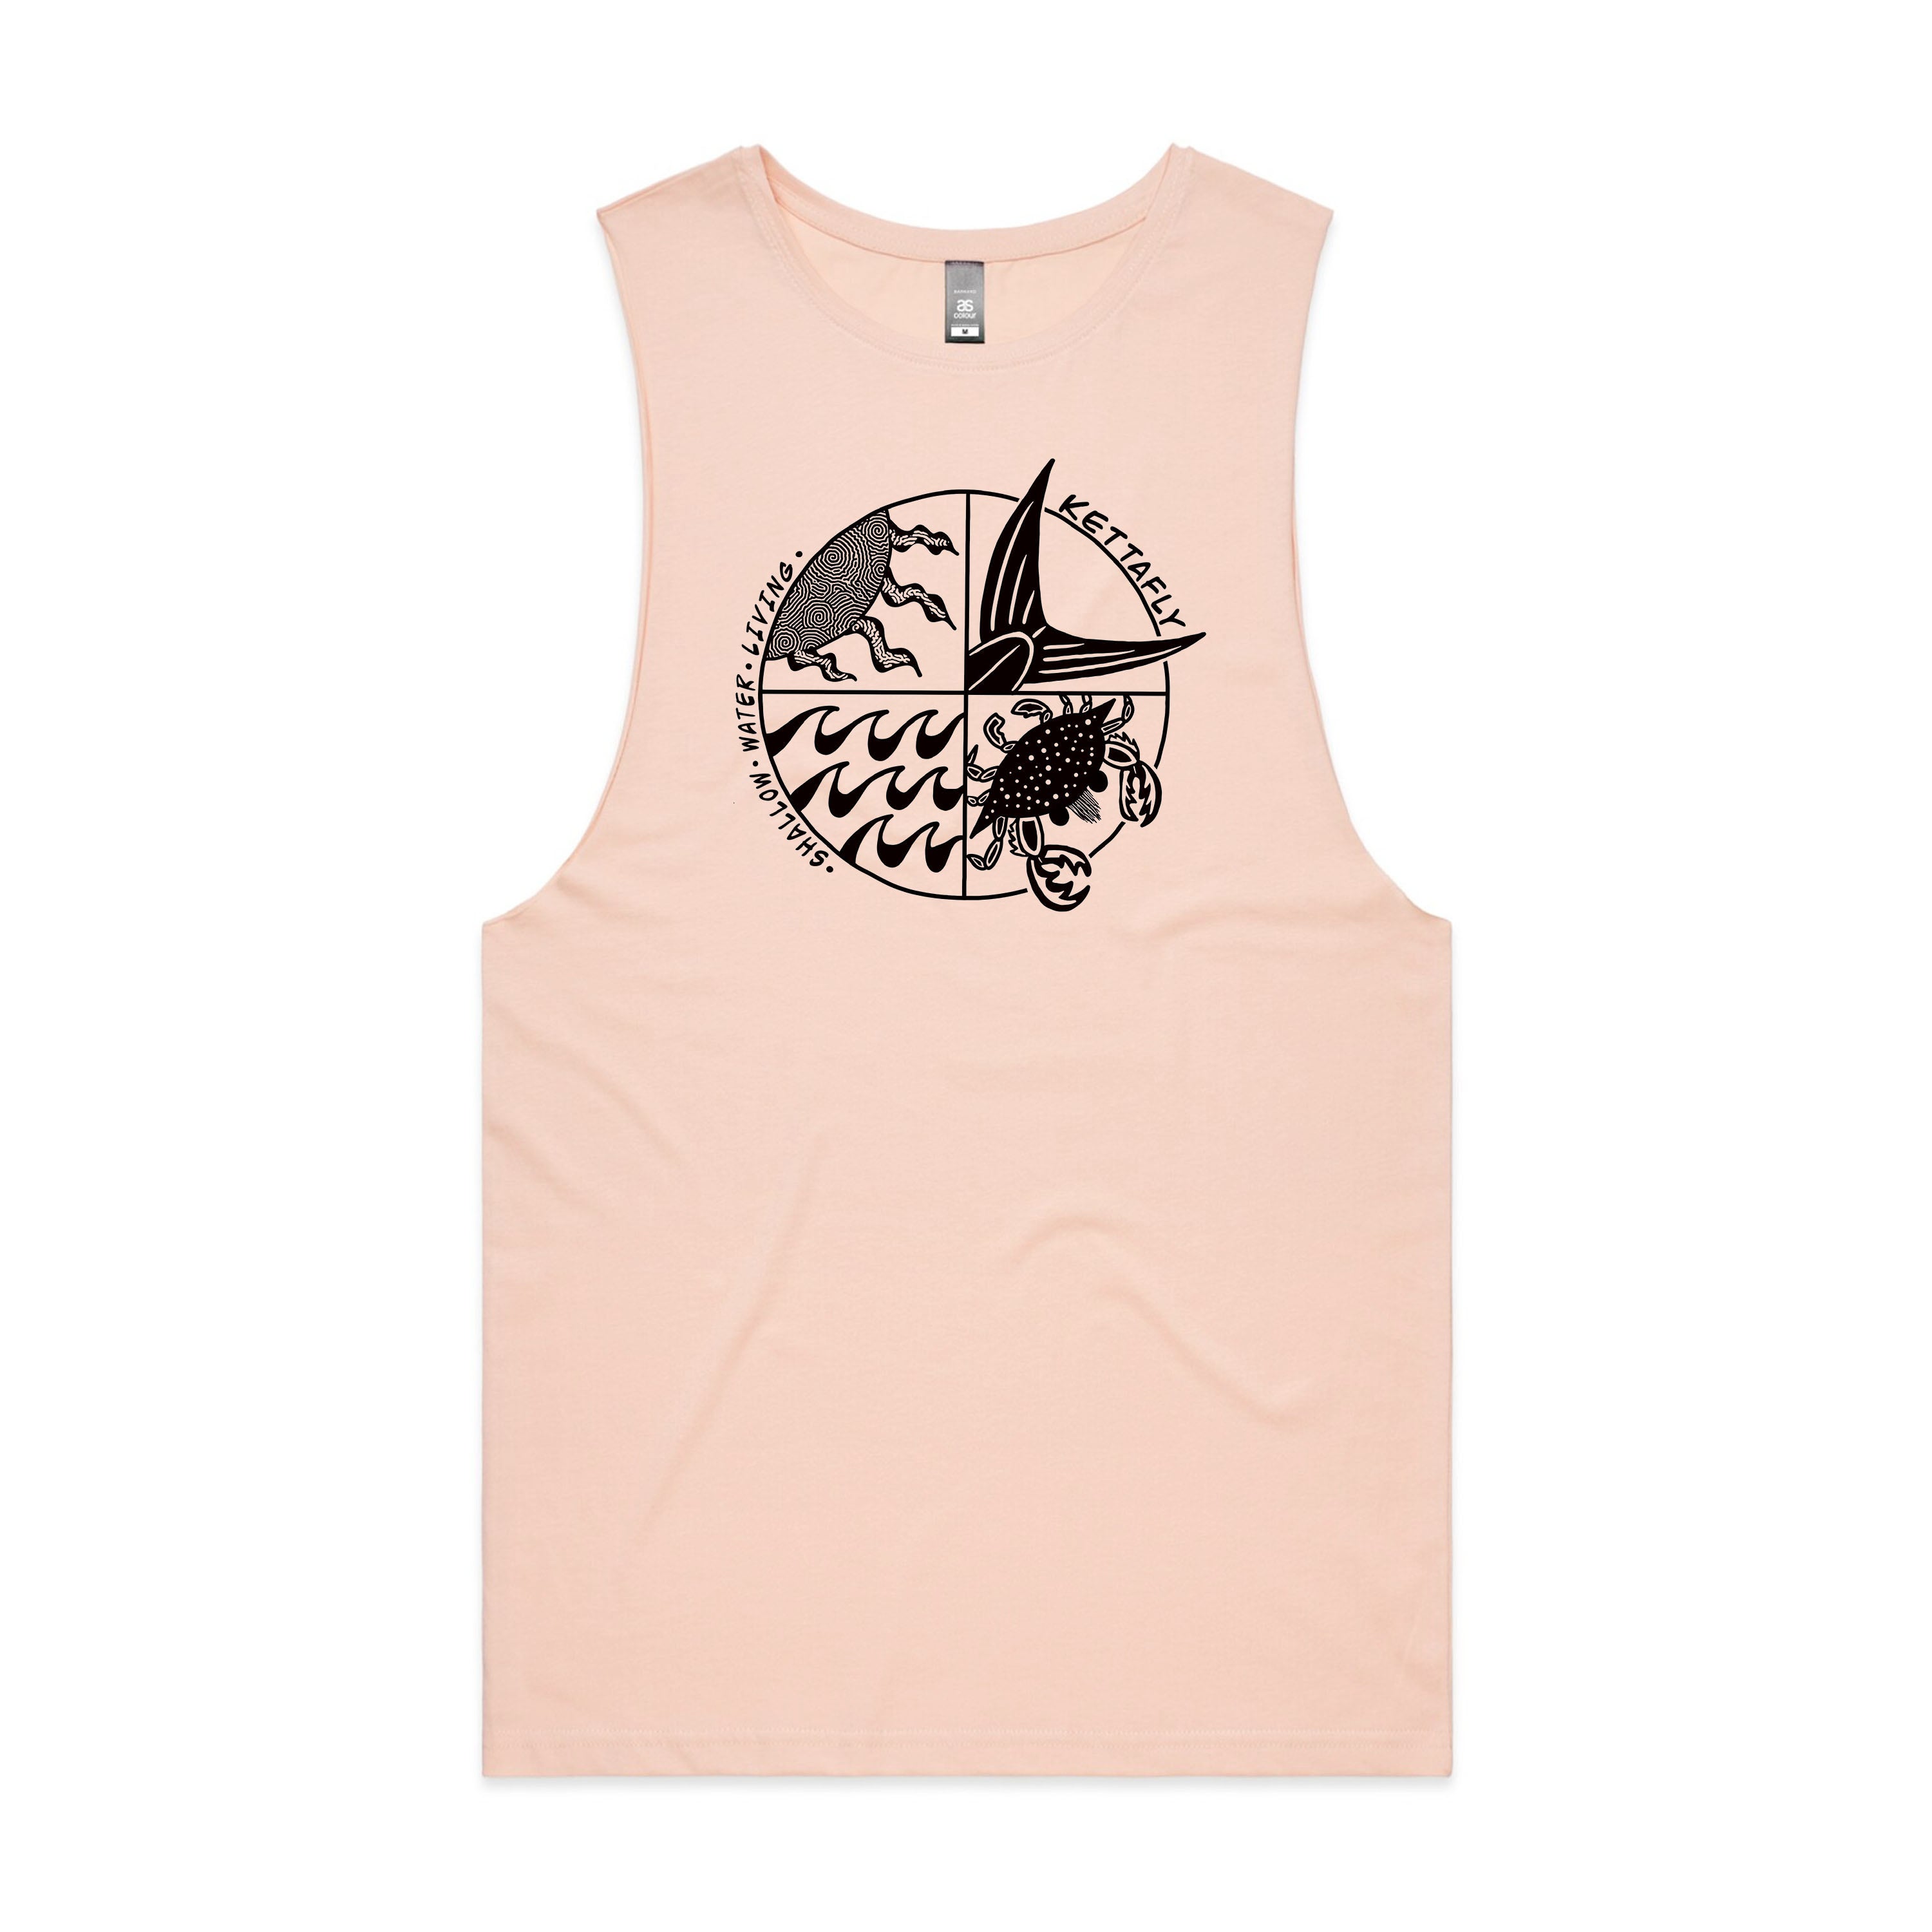 Shallow Water Living Design (front) Tank Top